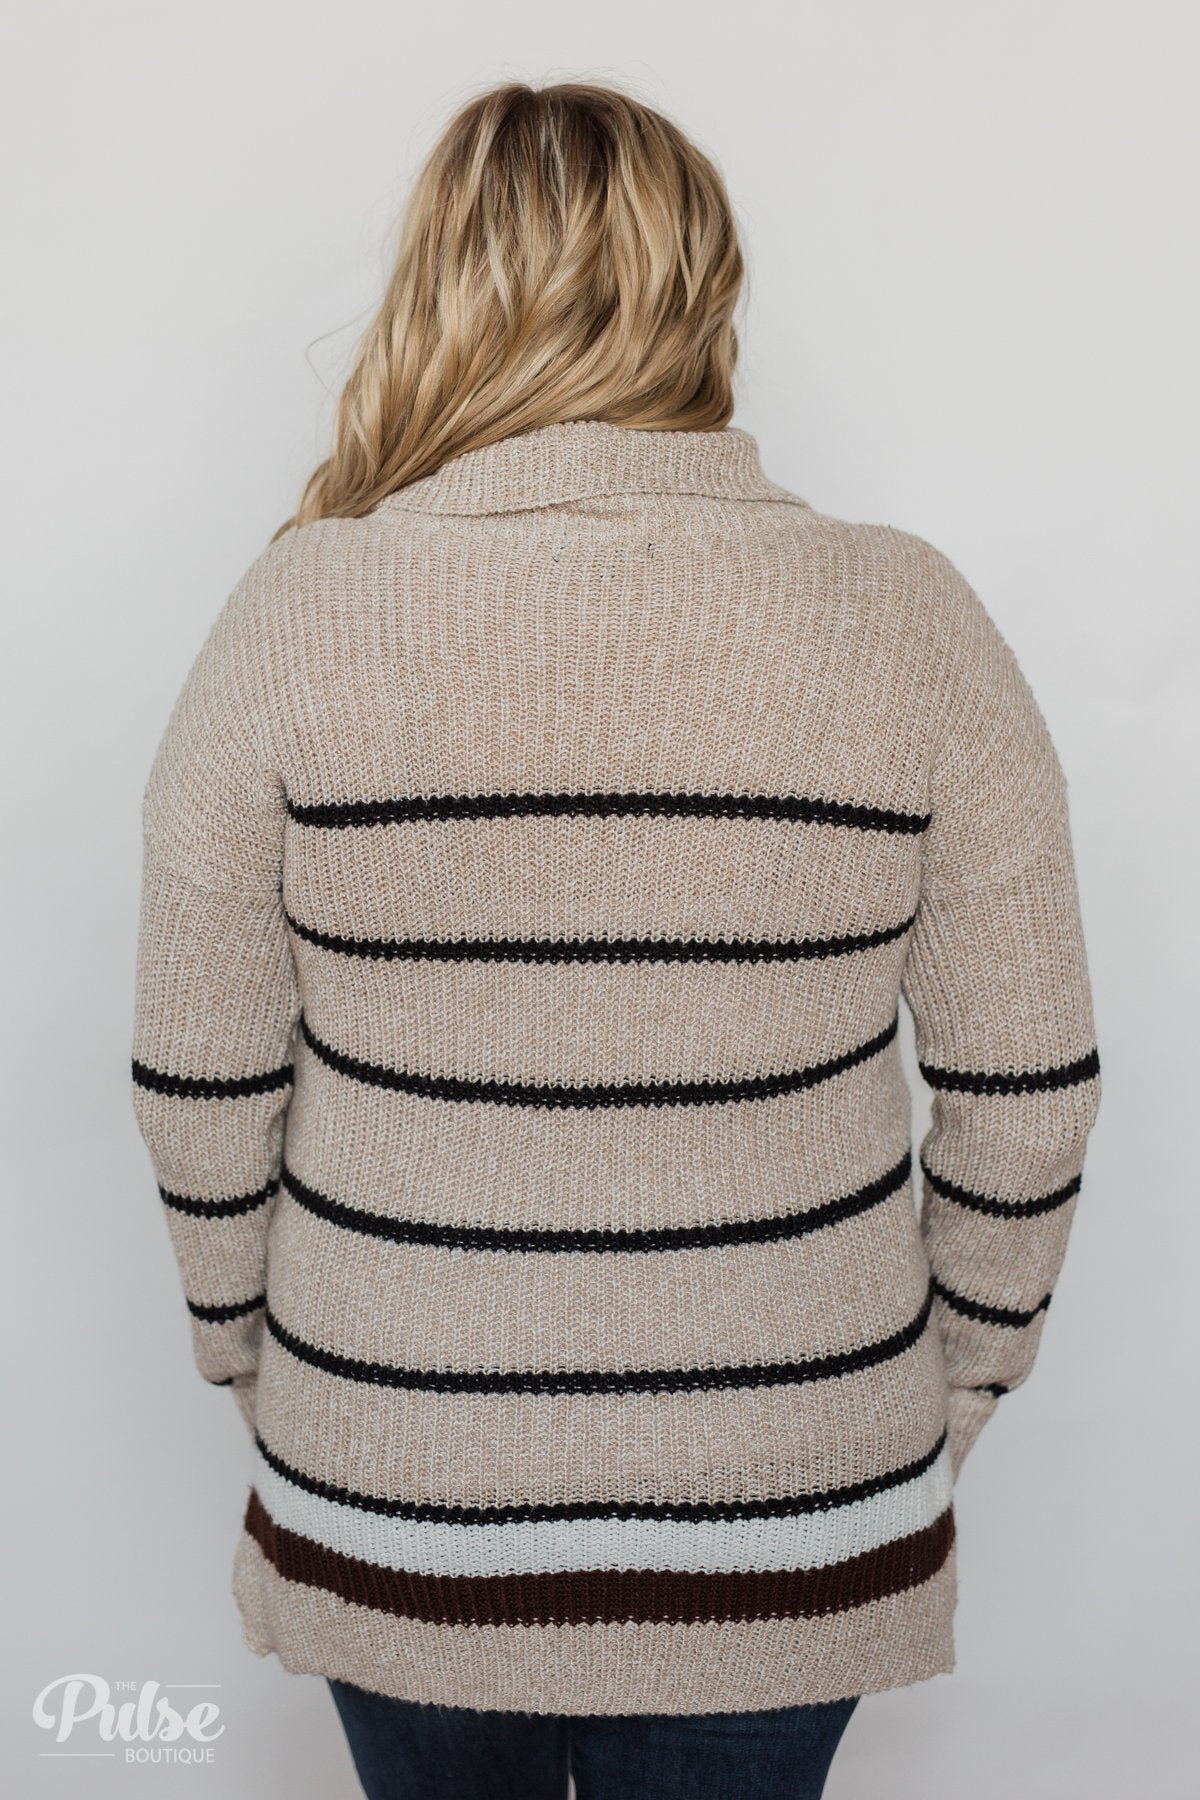 The Way You Make Me Feel Turtleneck Sweater- Neutral Tones